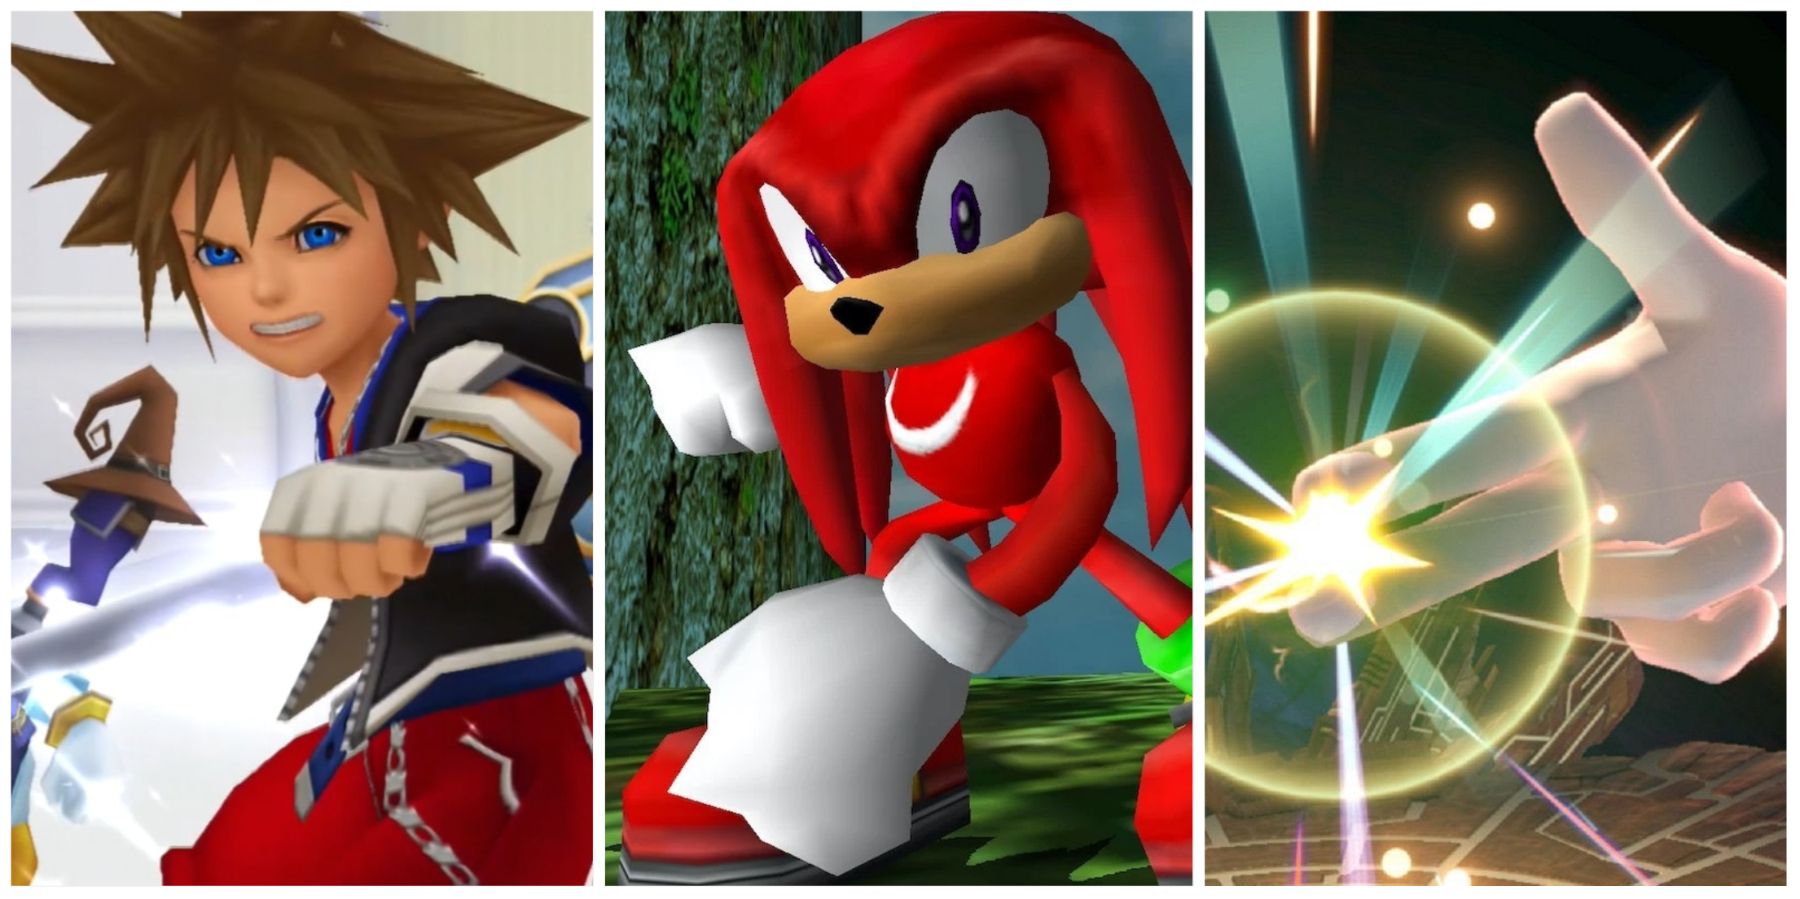 Sora, Knuckles, and Master Hand for iconic gloves article